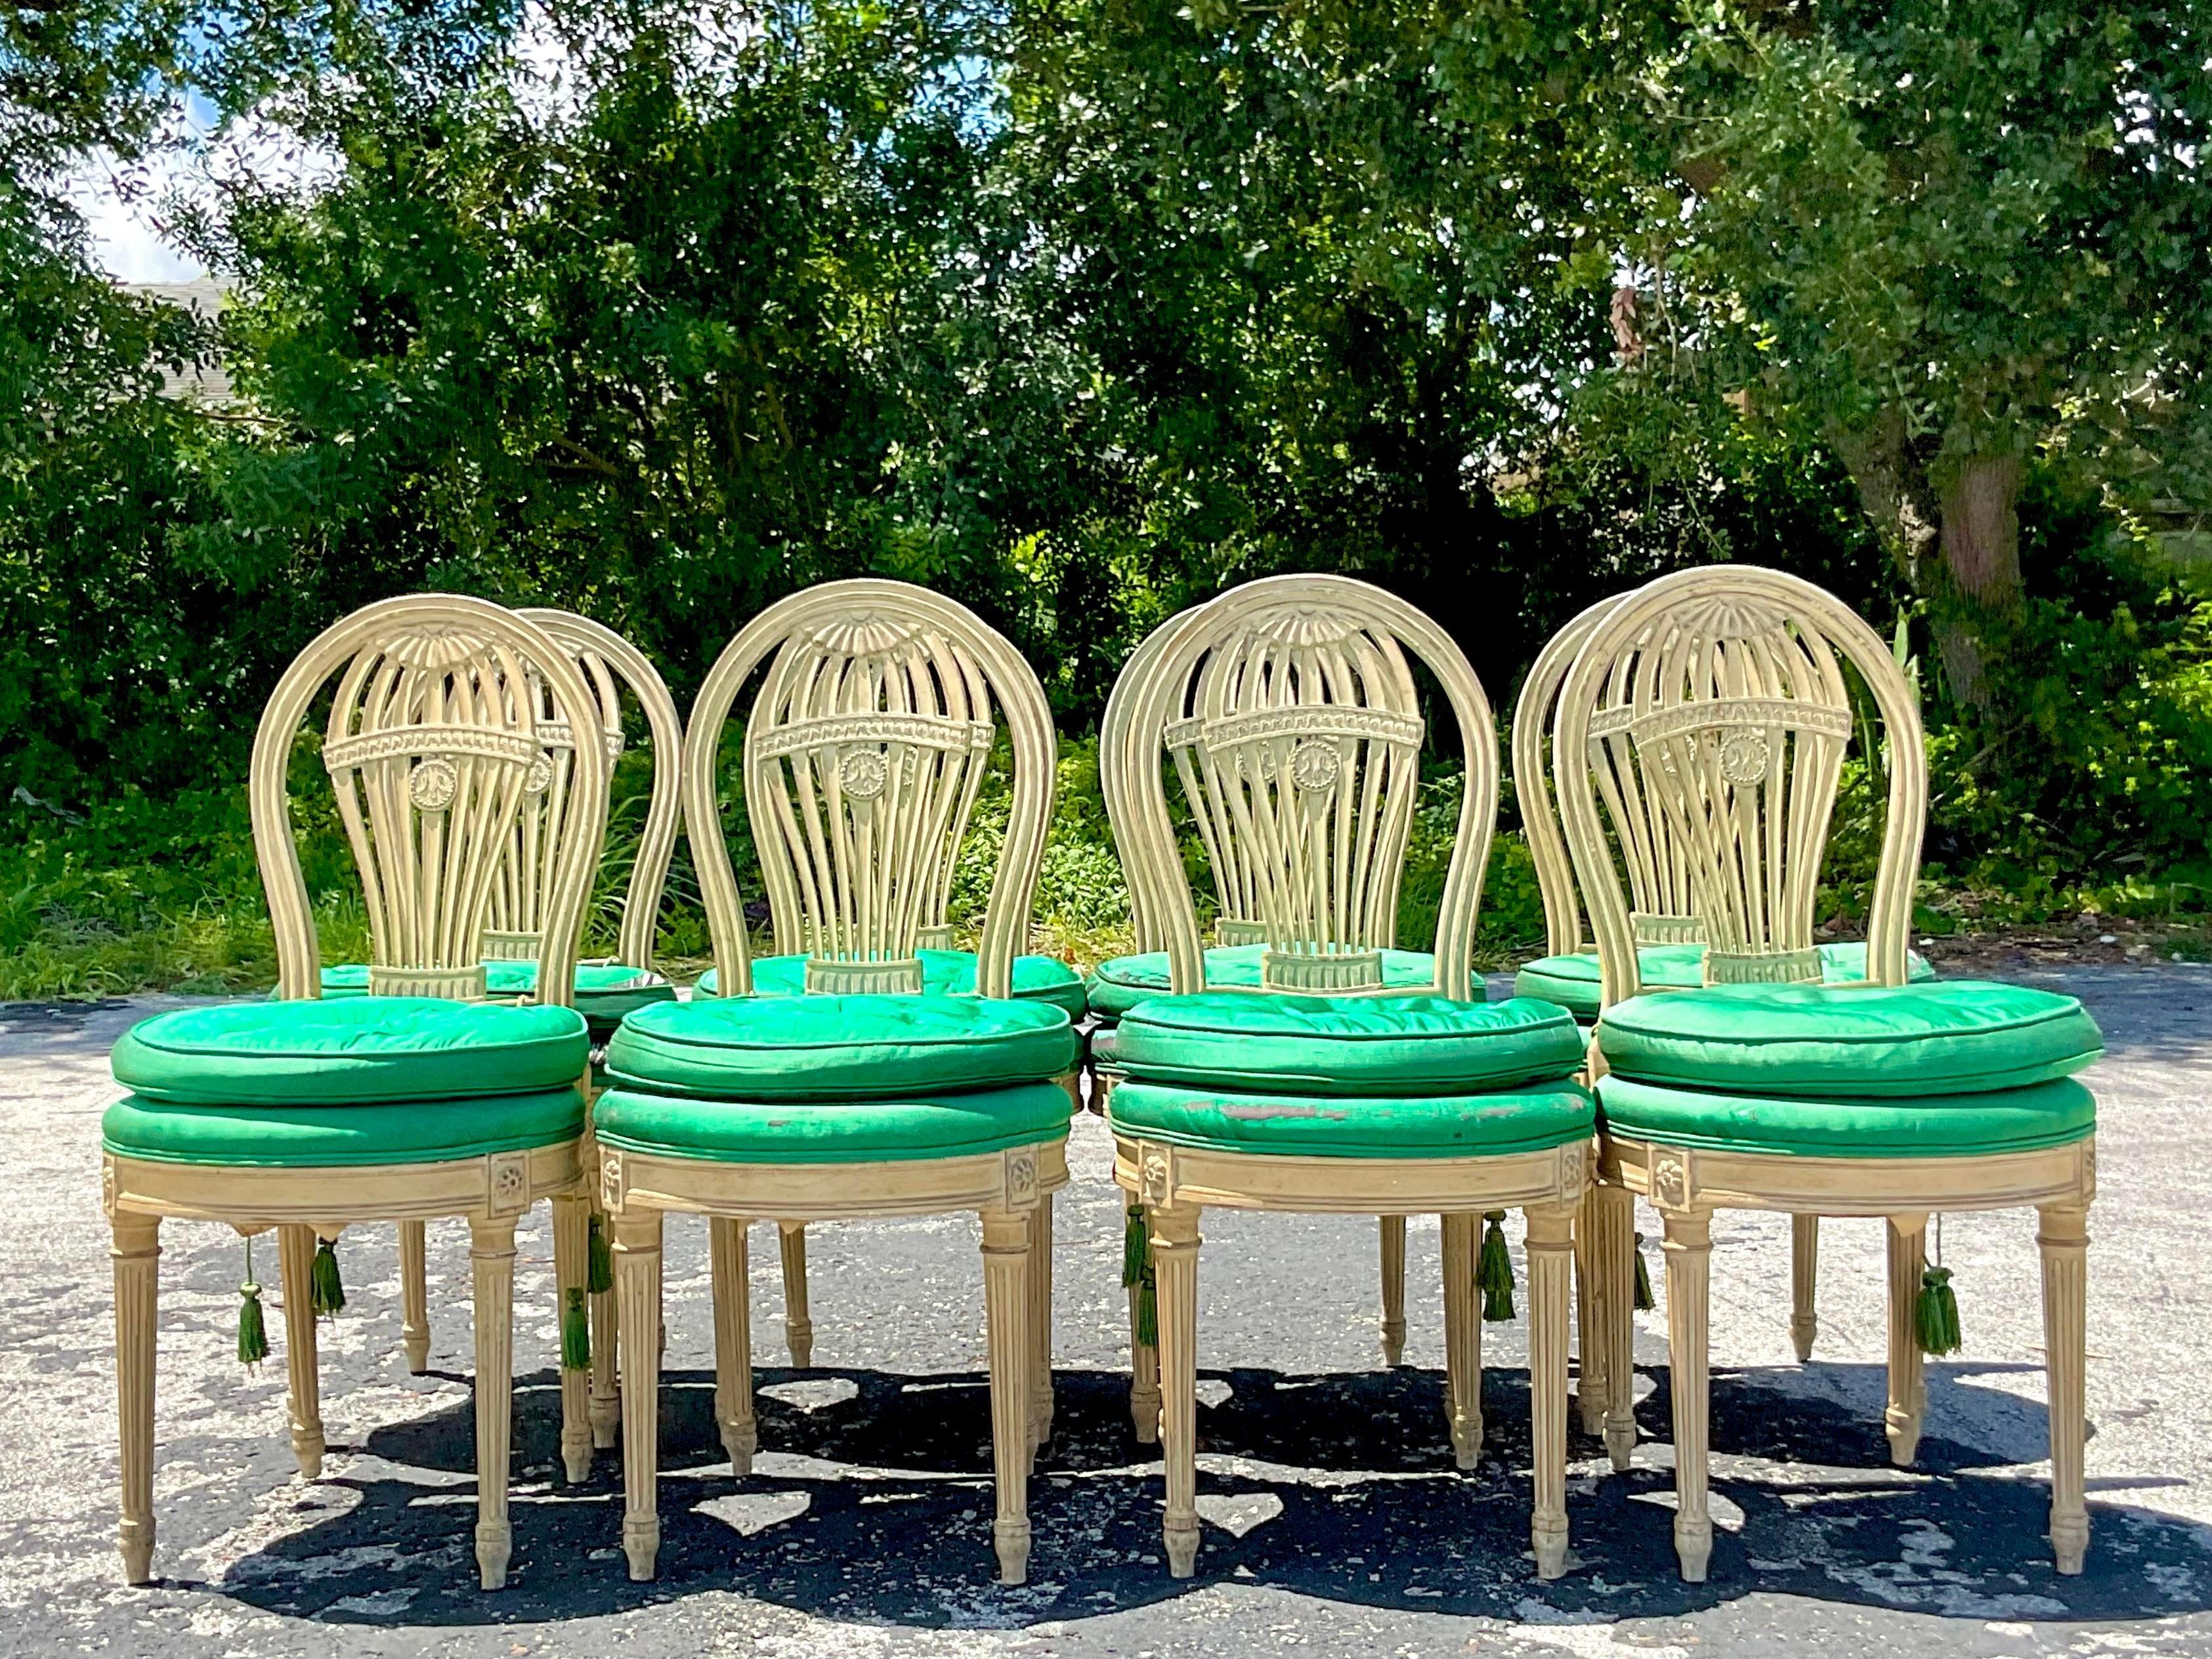 A spectacular set of 8 vintage a Regency dining chairs. Made by the J. Gattuso and Sons group. Done in the manner of Maison Jansen. A beautiful balloon back shape with beautiful hand carved detail. Acquired from a Palm Beach estate.